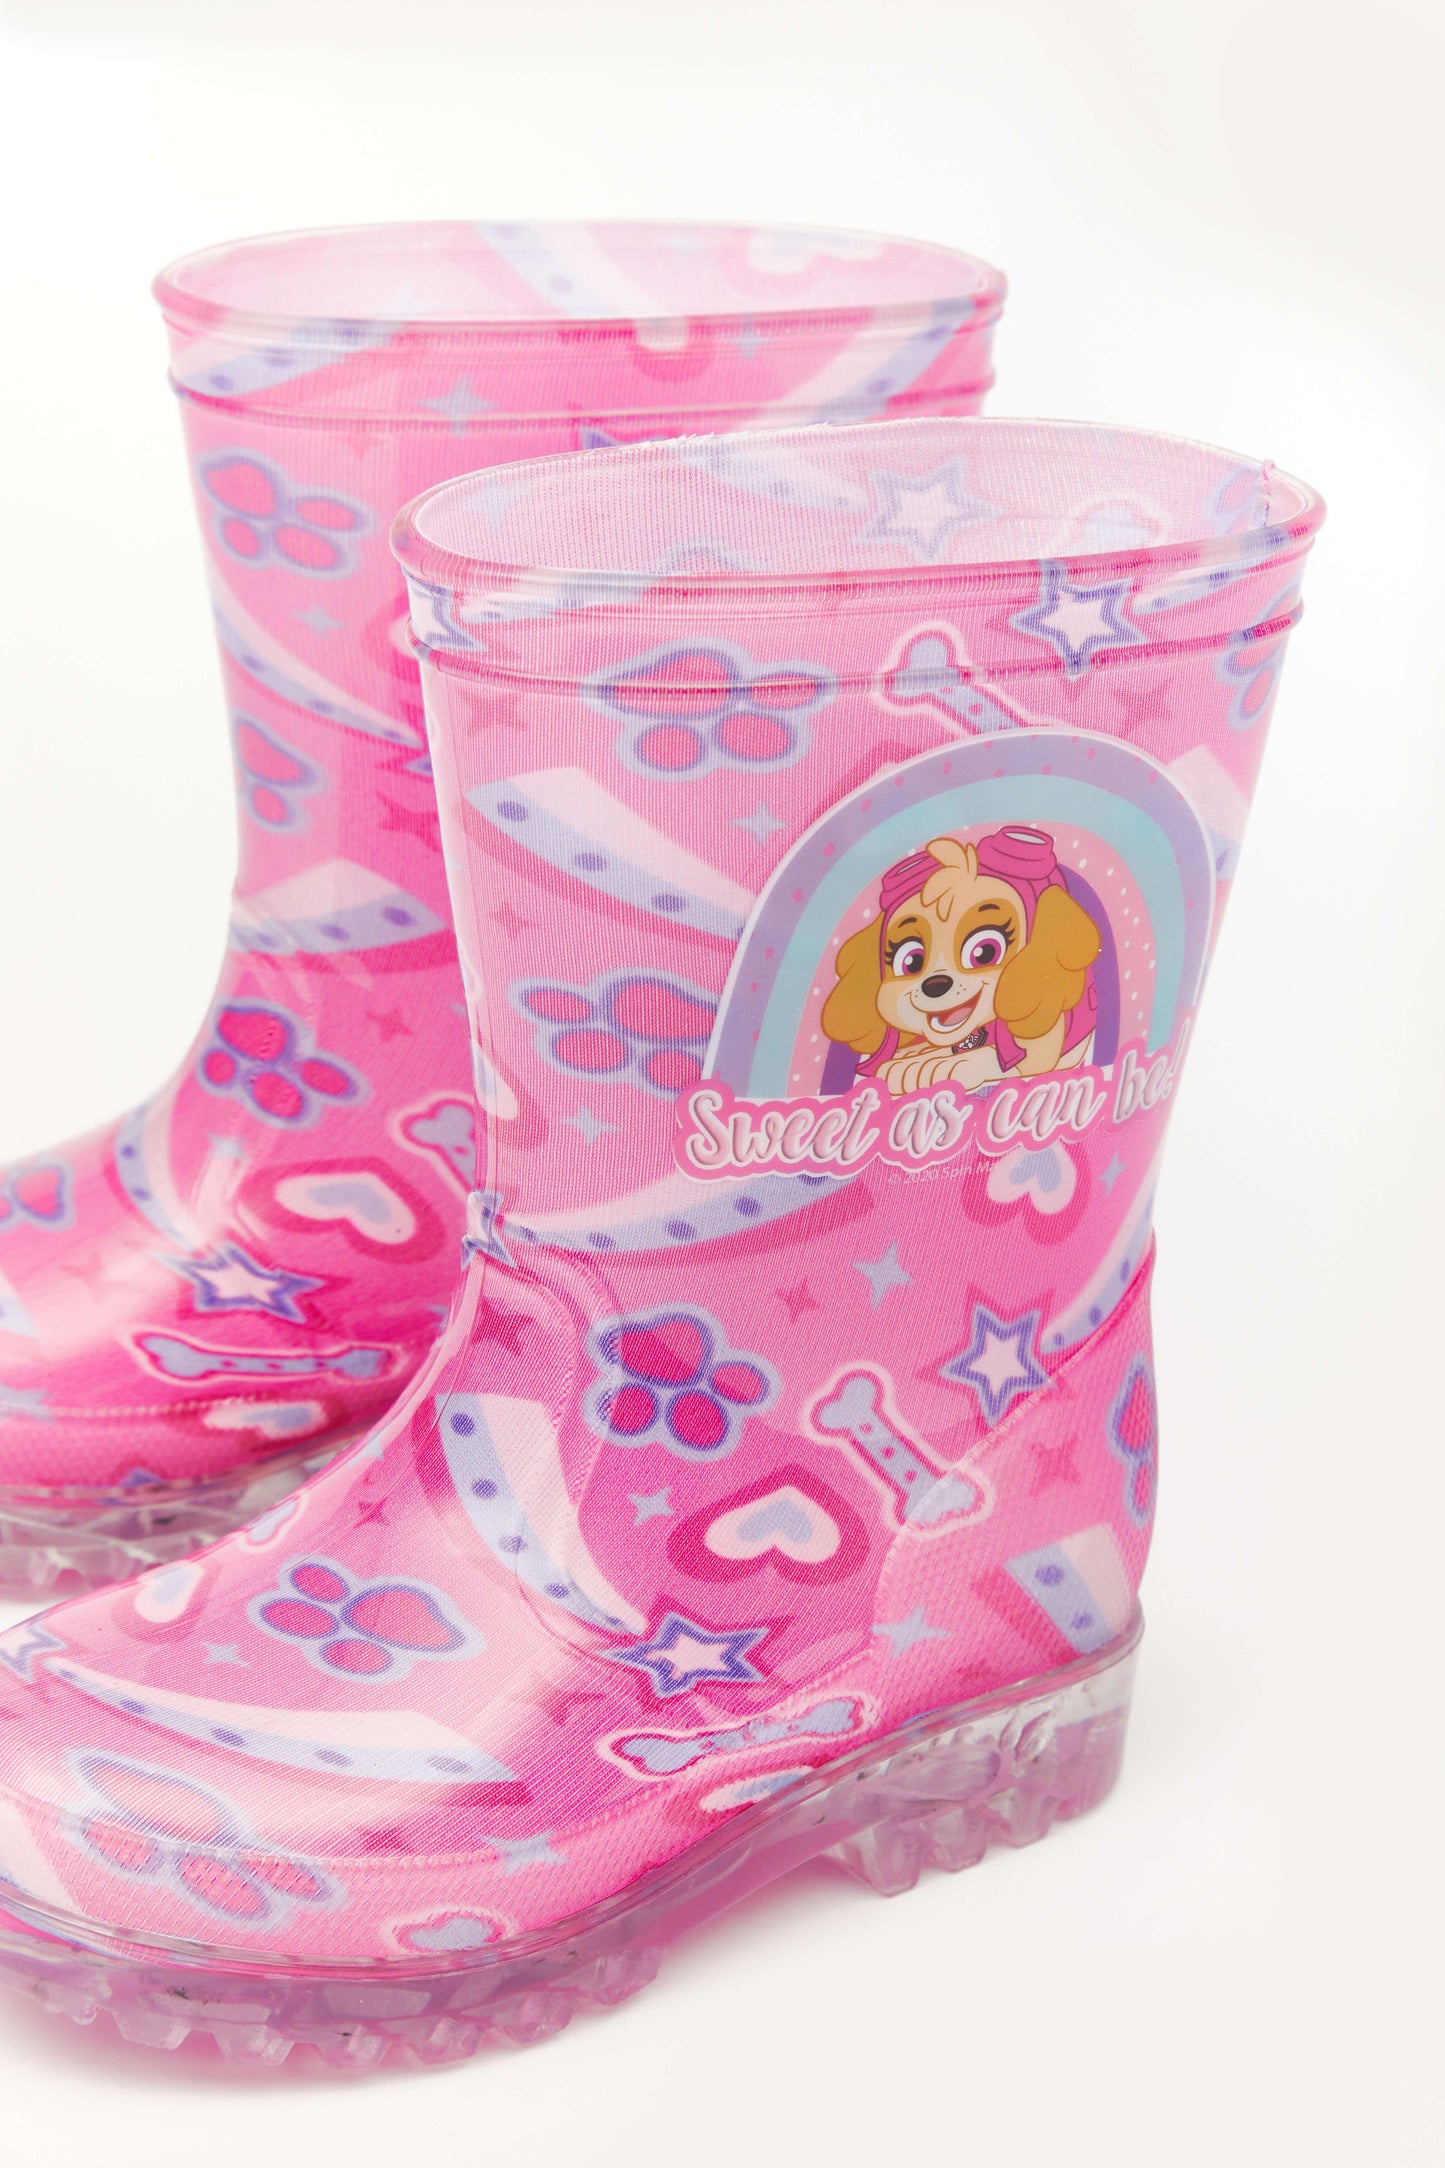 Paw Patrol Girls "Sweet as Can Be!" Wellies Rain Boots